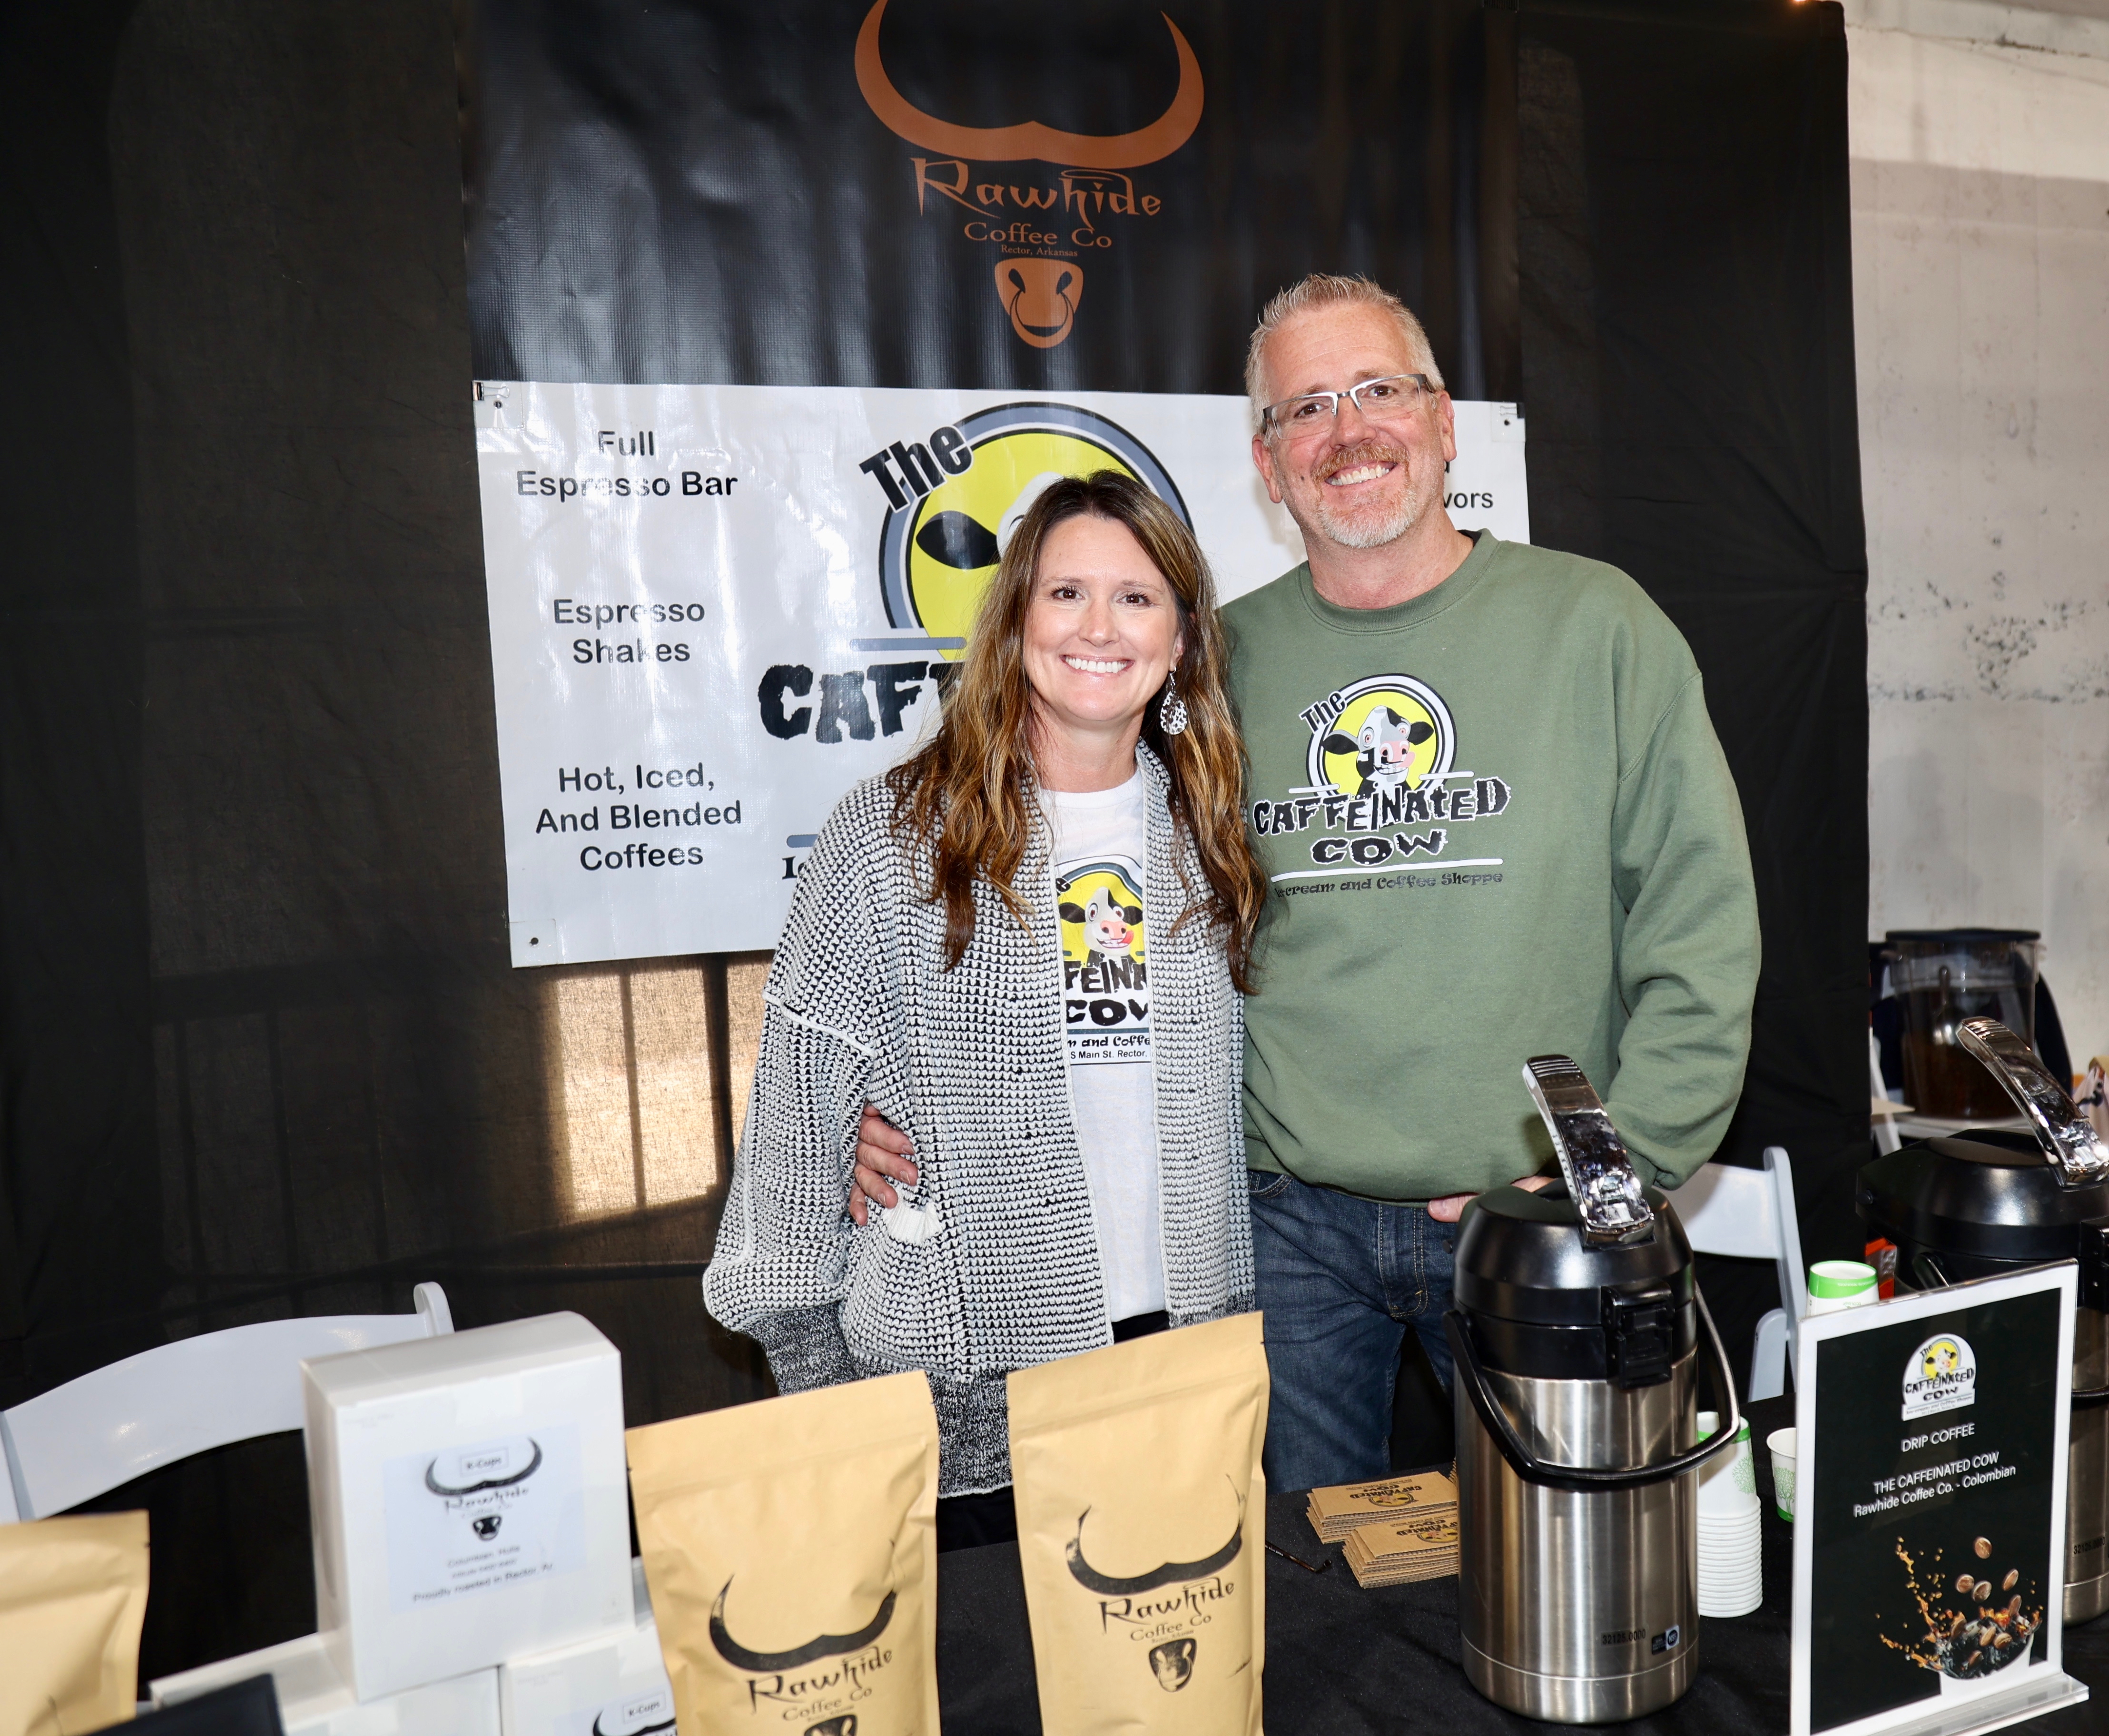 Brewing for Hope Coffee Festival